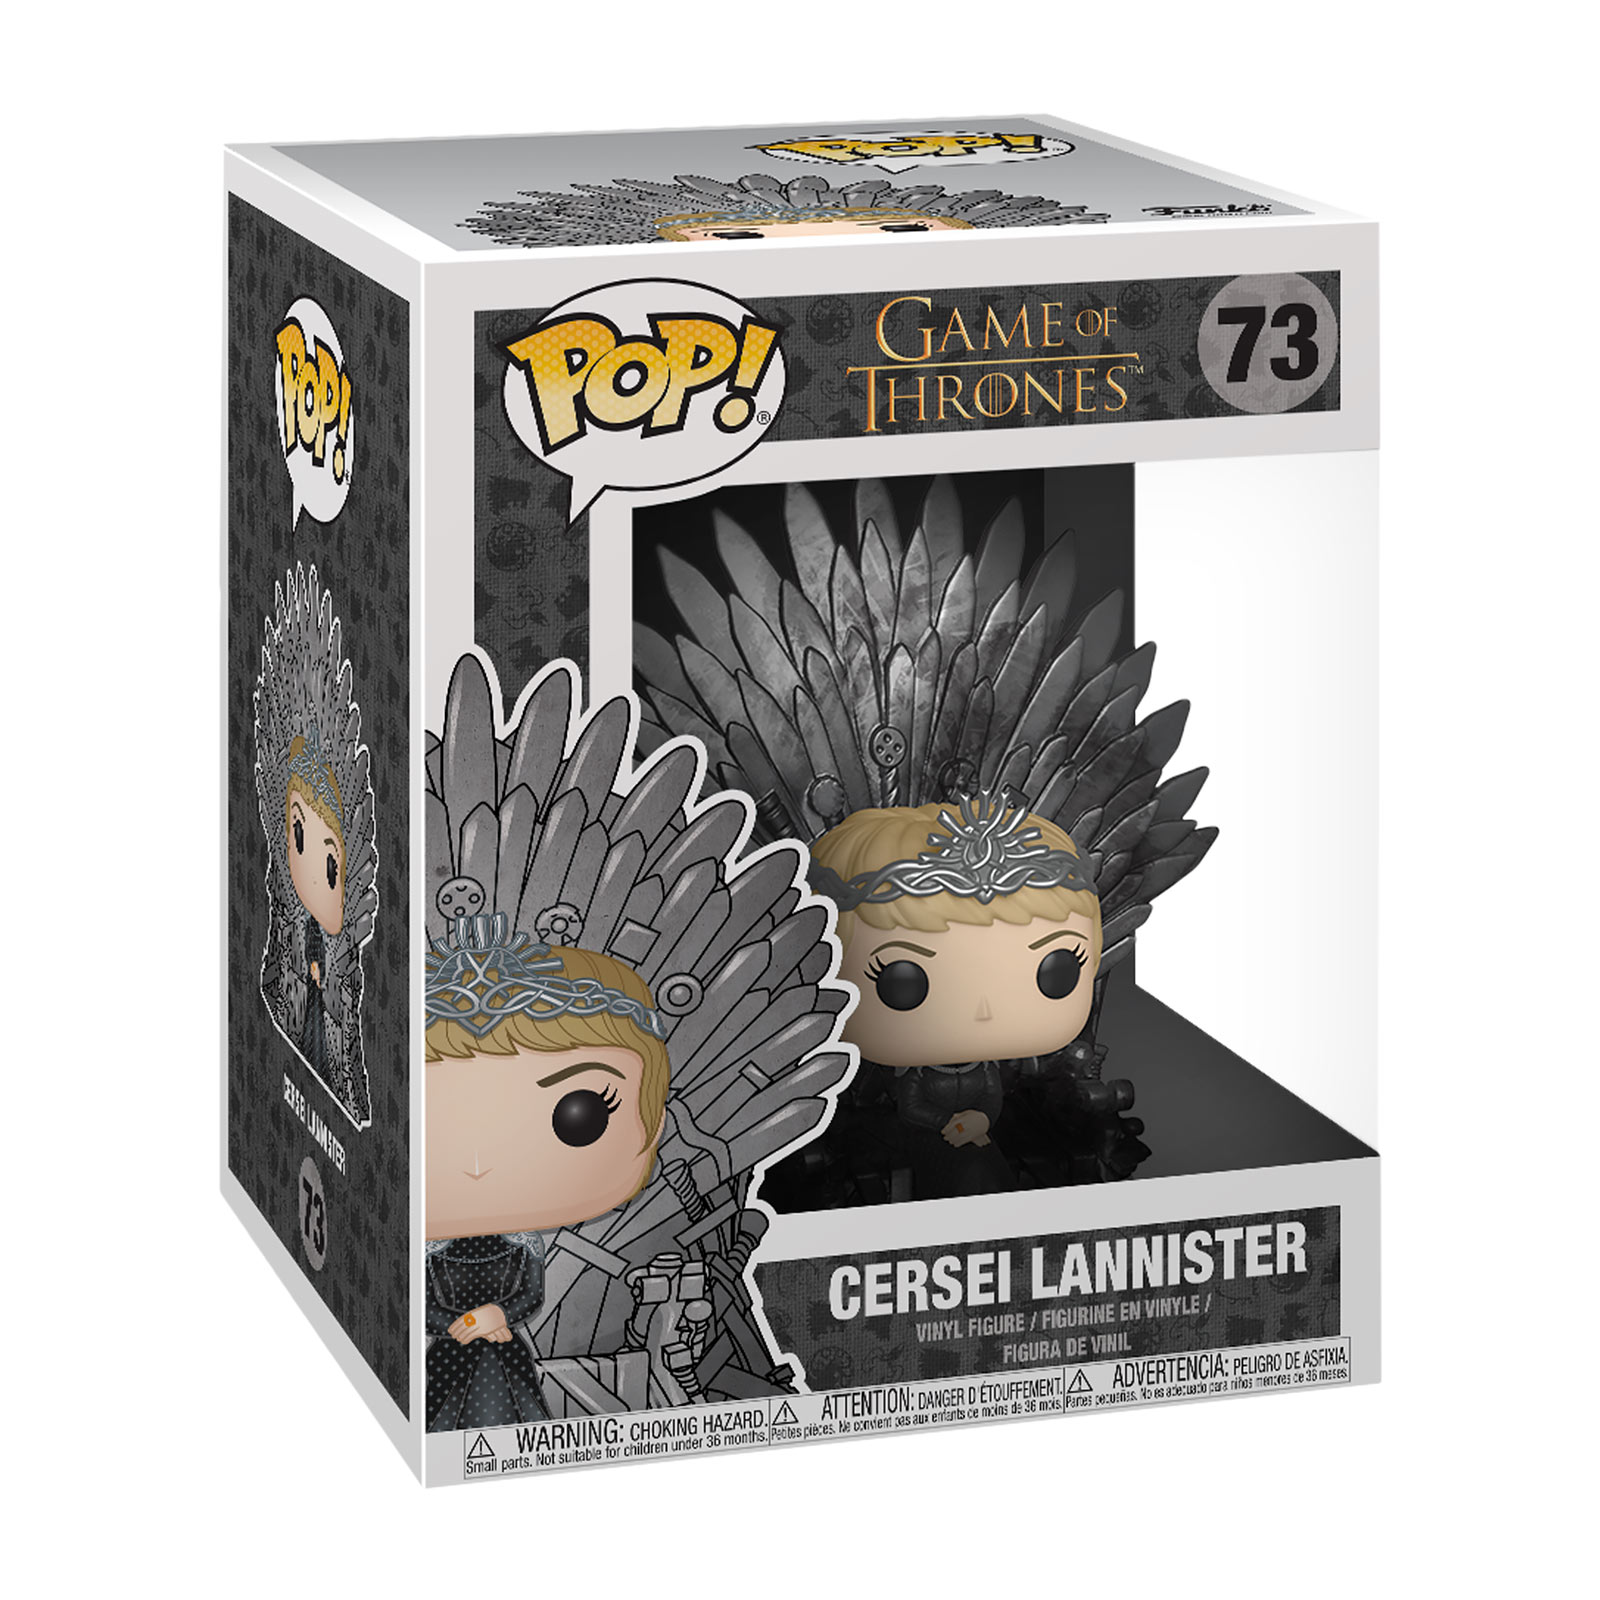 Game of Thrones - Cersei Lannister with Iron Throne Funko Pop Figurine